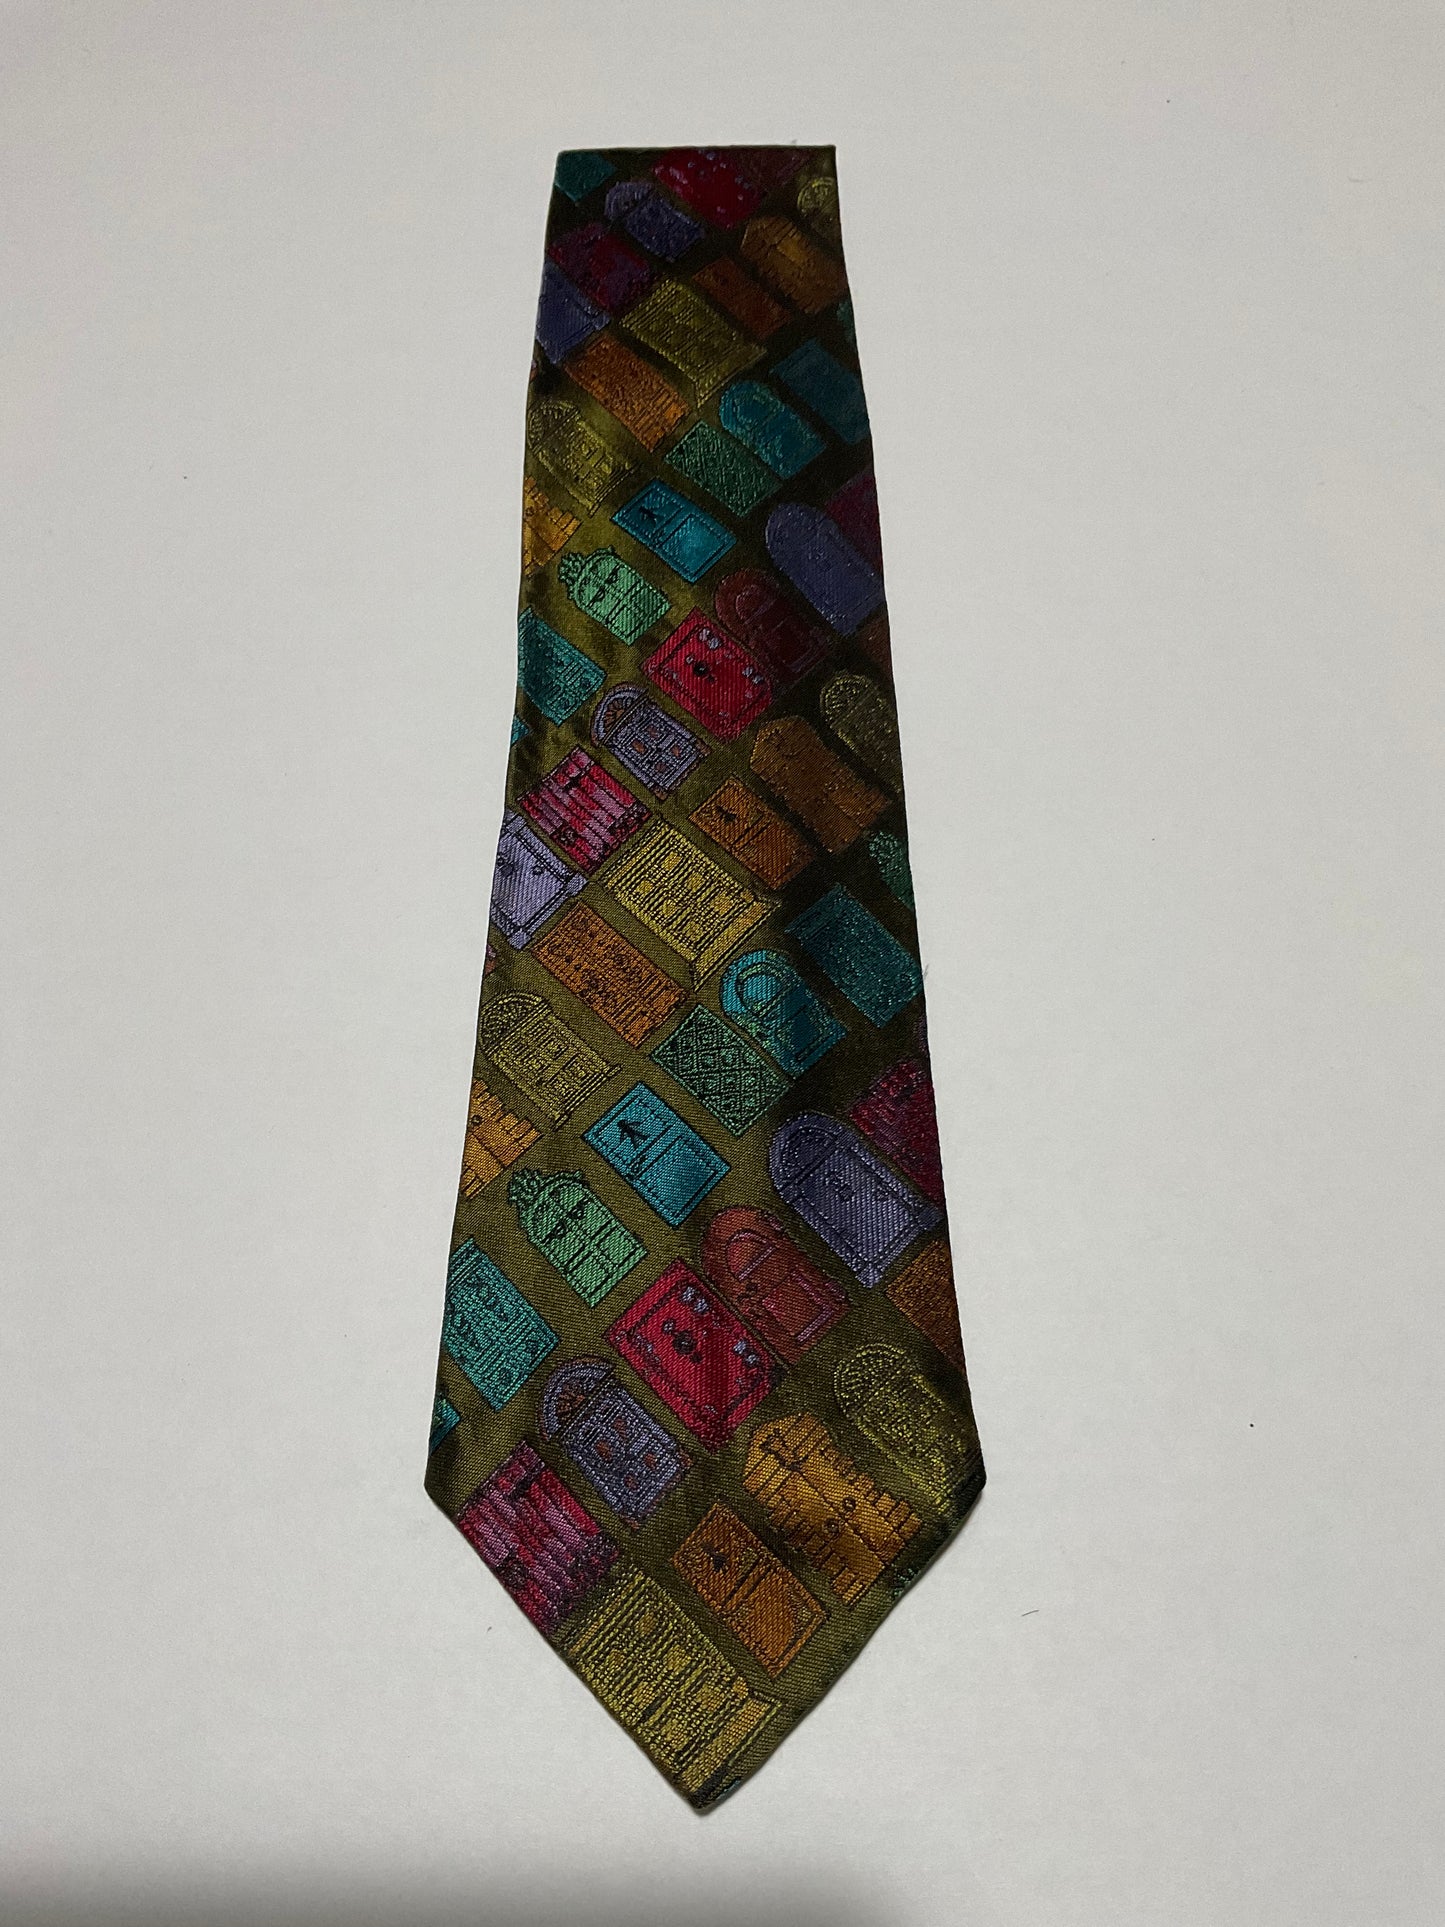 TIE / PURE SILK / NEW / APPX. 3 3/4” WIDE / MOSCHINO / HAND MADE IN ITALY